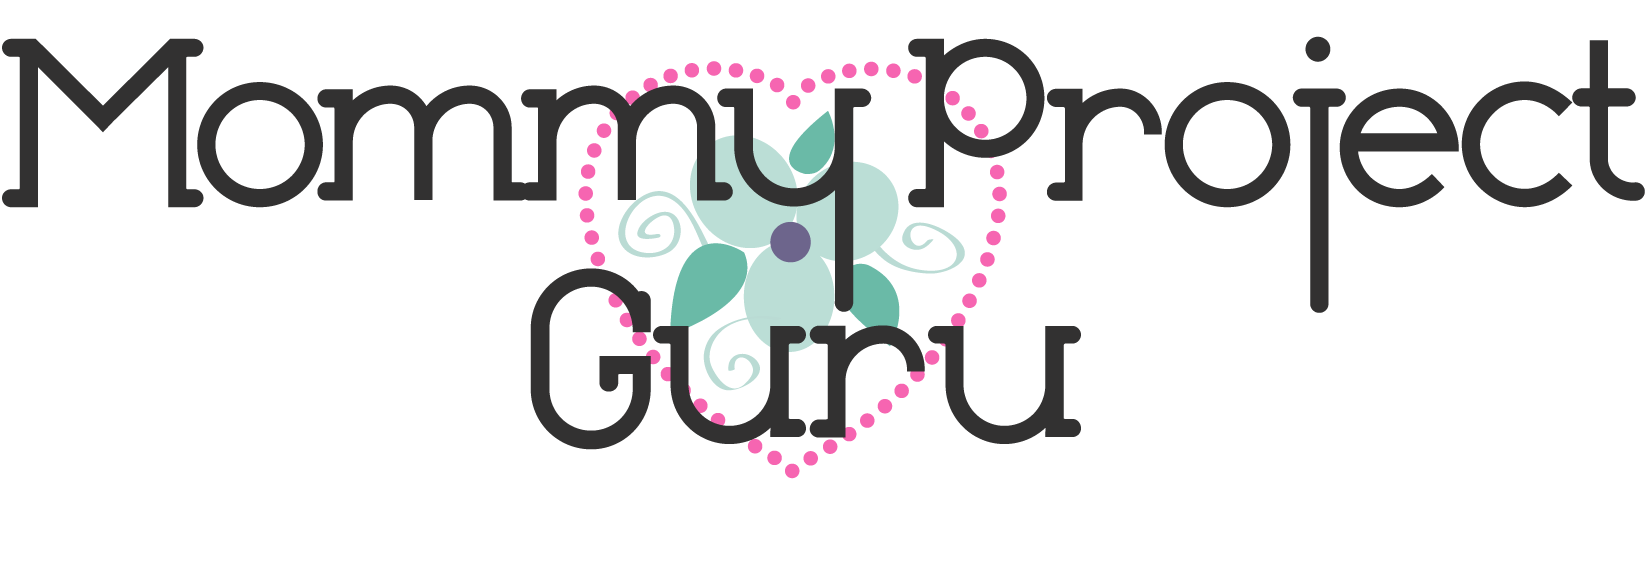 The Mommy Project Guru